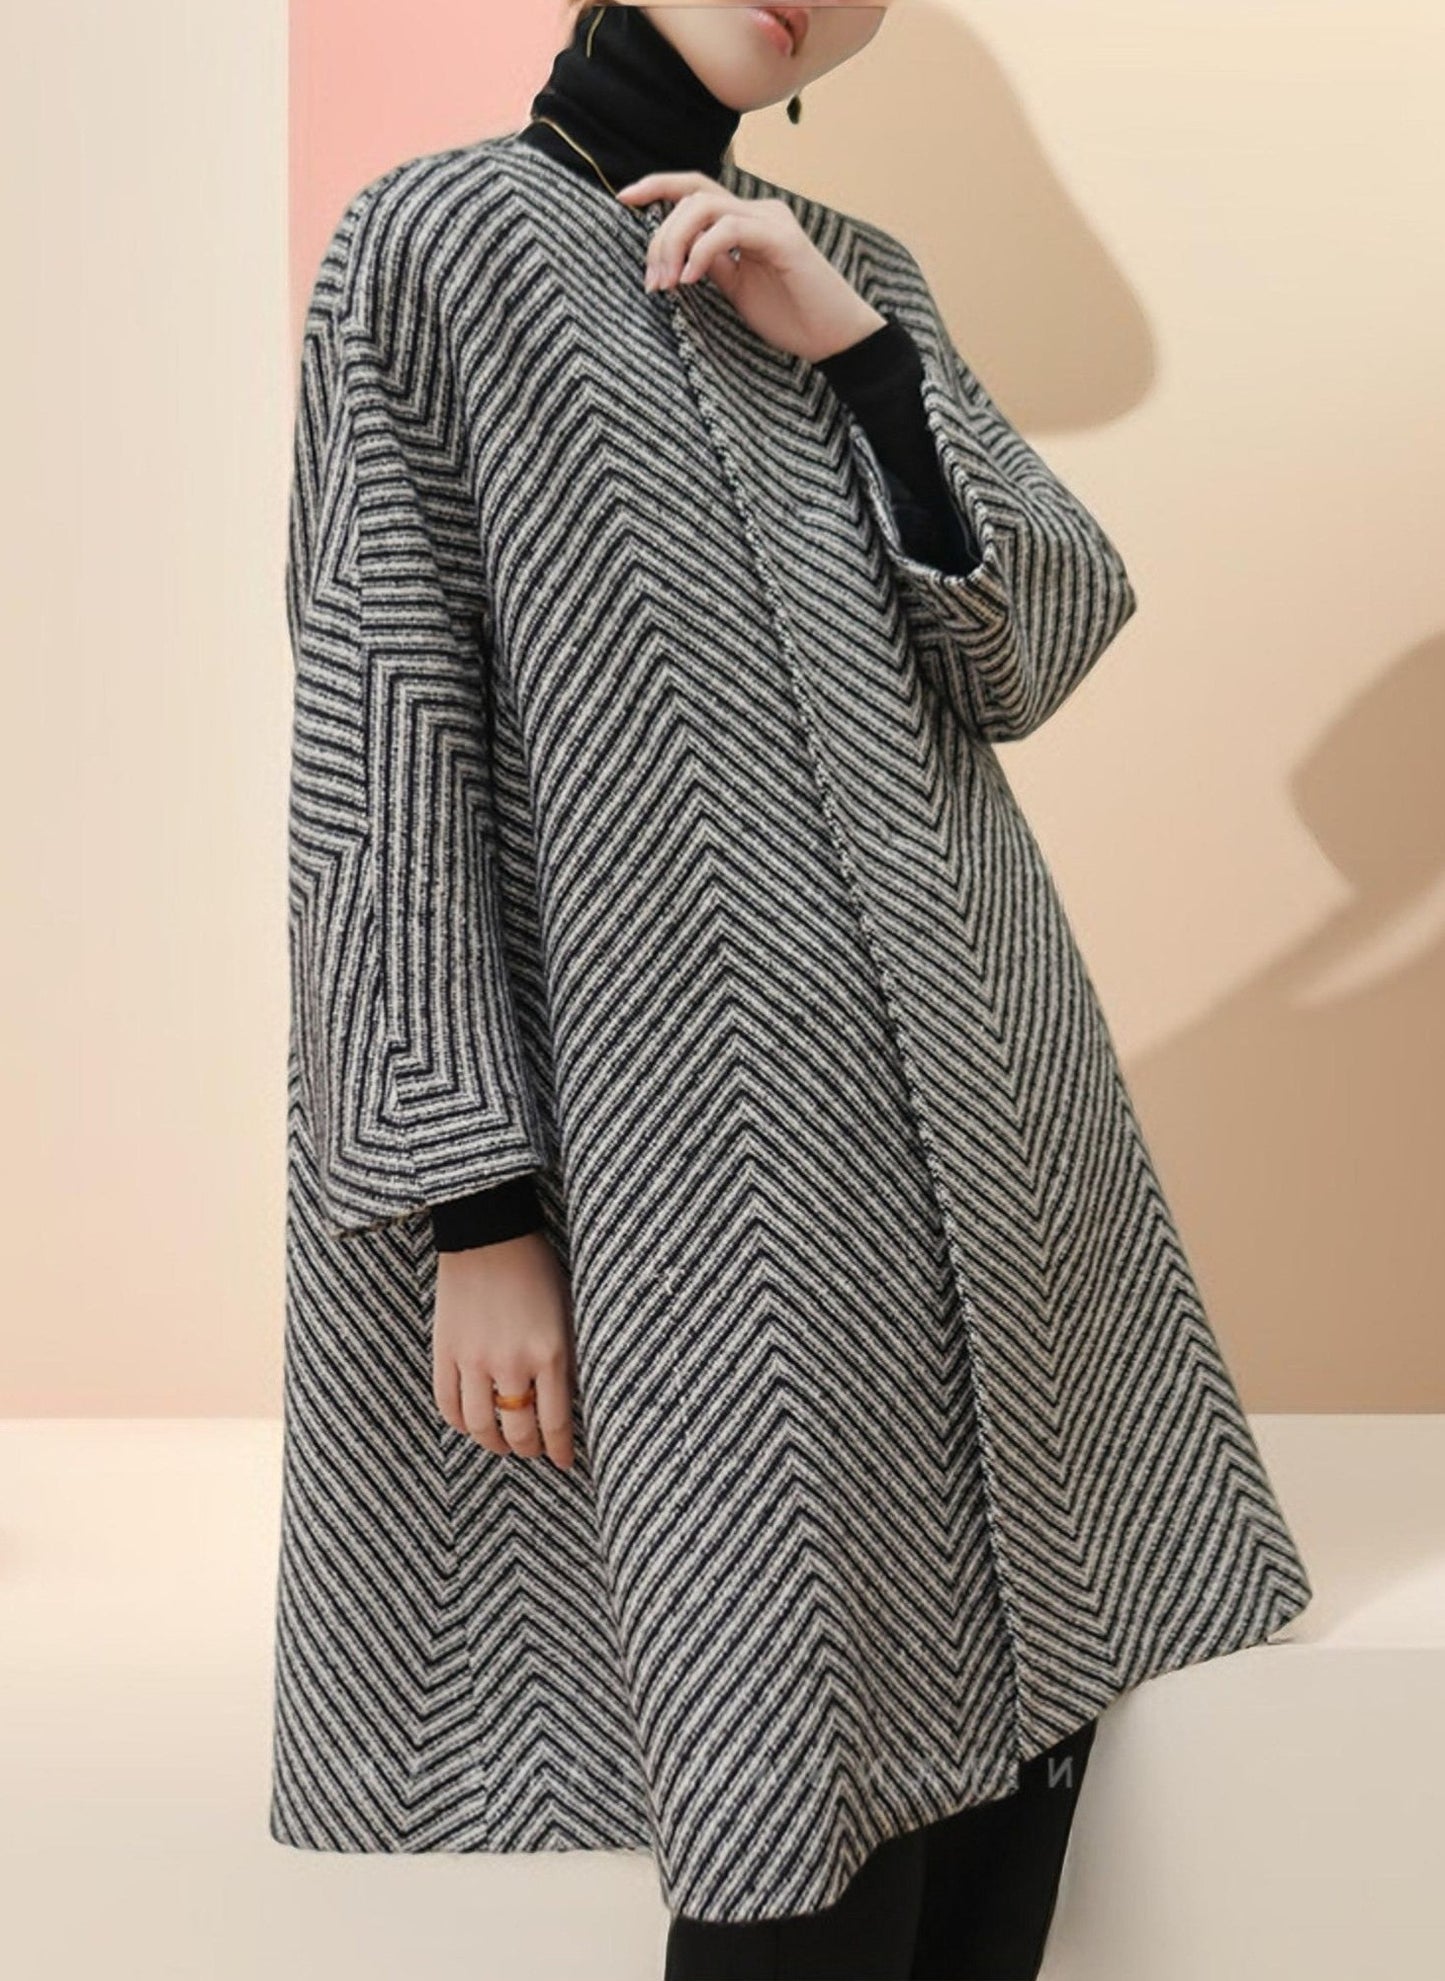 Women's Black and White Zig Zag Wool Coat - Try Modest Limited 